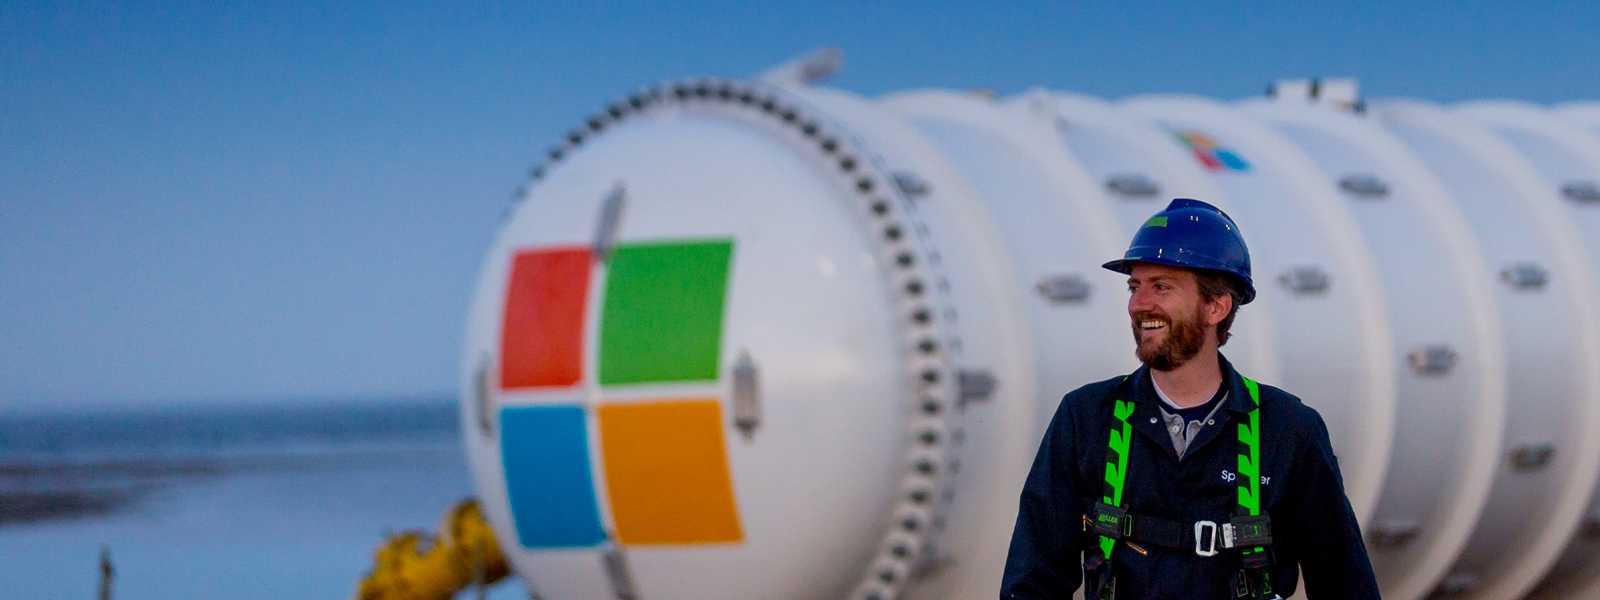 A smiling industrial worker walking in front of a gas tank with a Microsoft logo